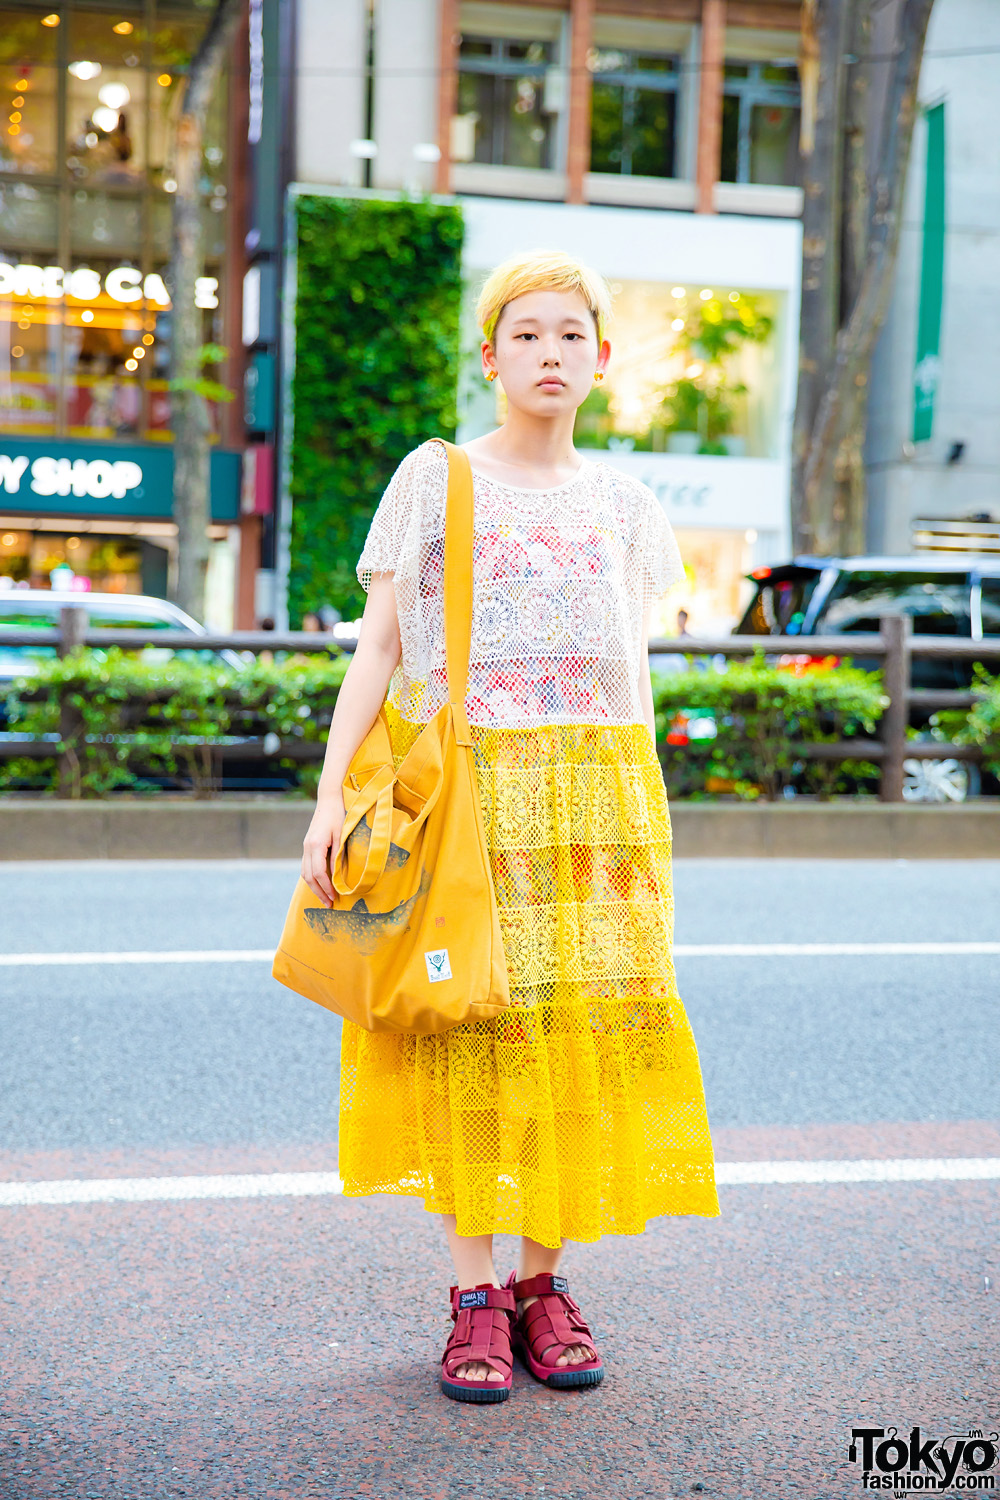 Harajuku Street Style w/ Pixie Cut, Zara Knit Dress Over UNIQLO Floral  Dress, Freak's Store Sandals & South2 West8 Tote Bag – Tokyo Fashion